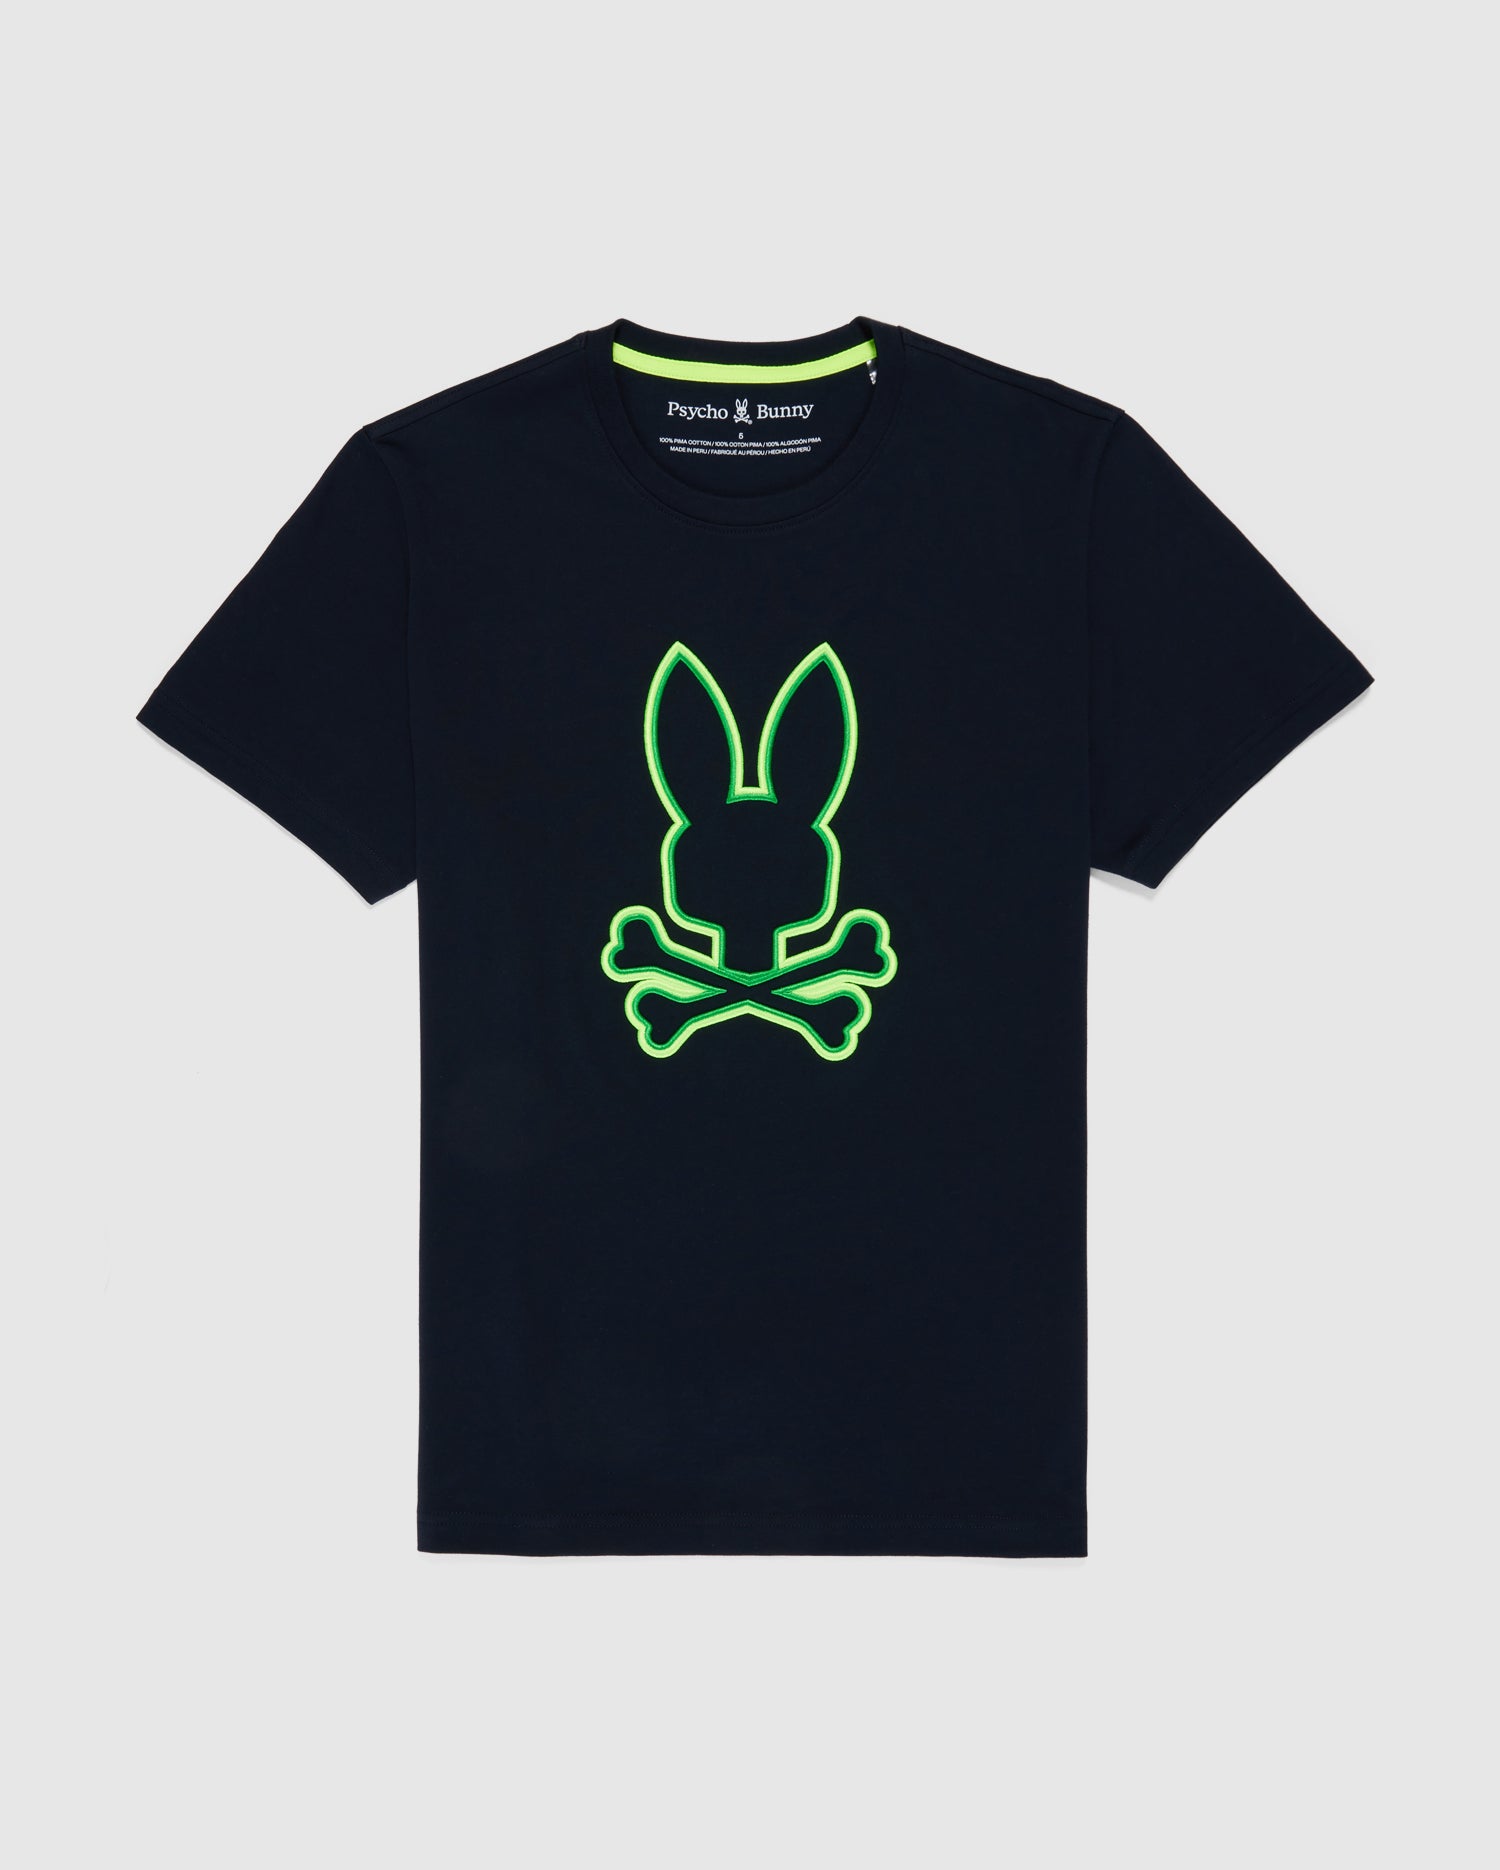 A black men's graphic tee featuring a fluorescent green outline of a bunny skull and crossbones logo in the center. Made from soft Pima cotton, this two-tone embroidered design showcases the text 